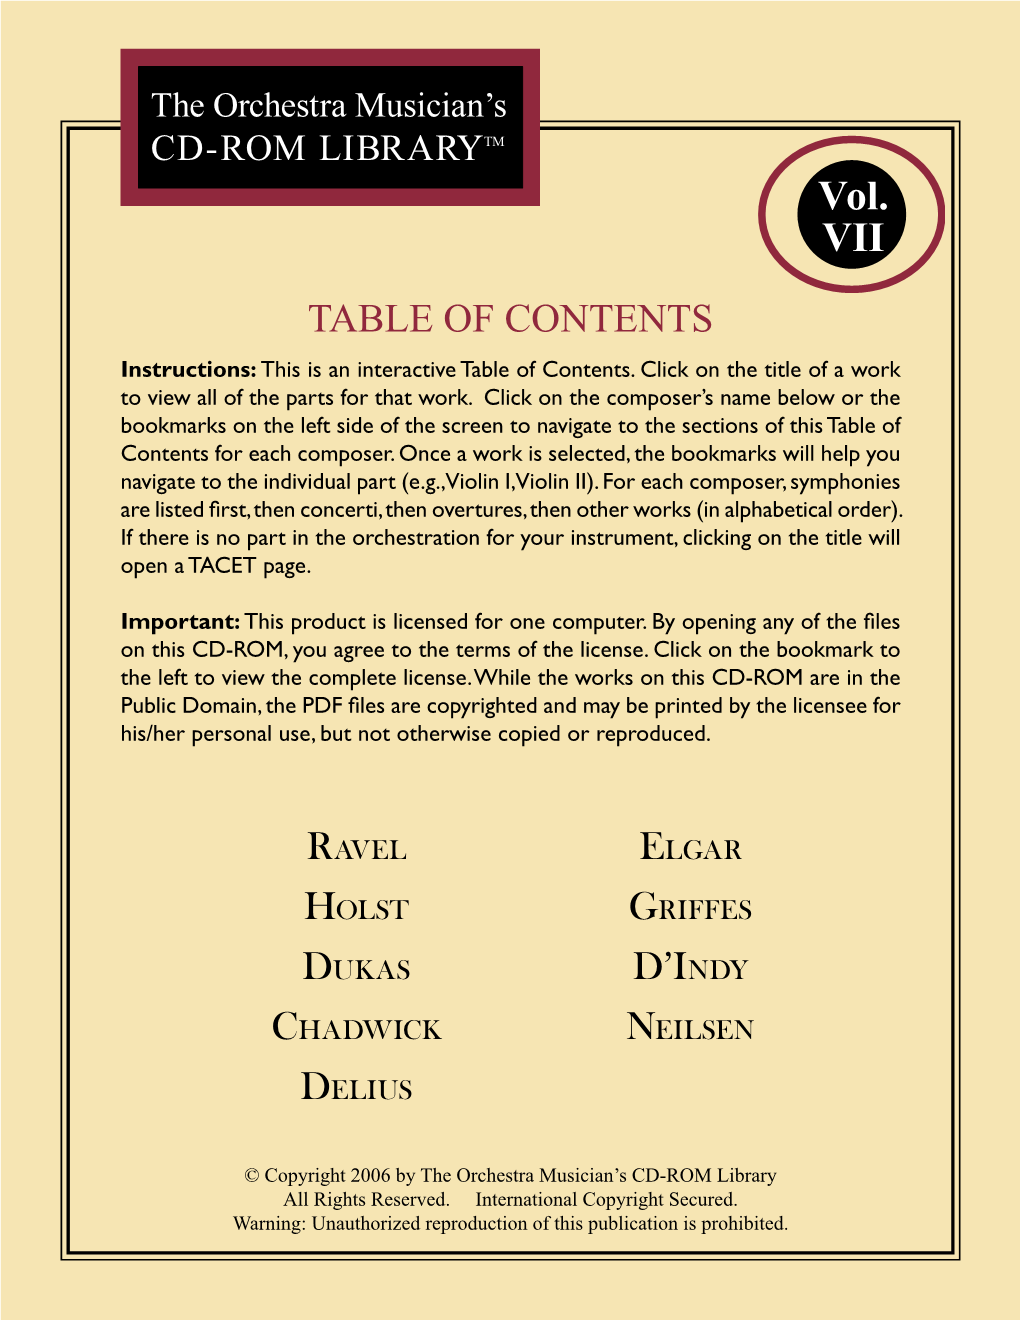 View Complete Table of Contents